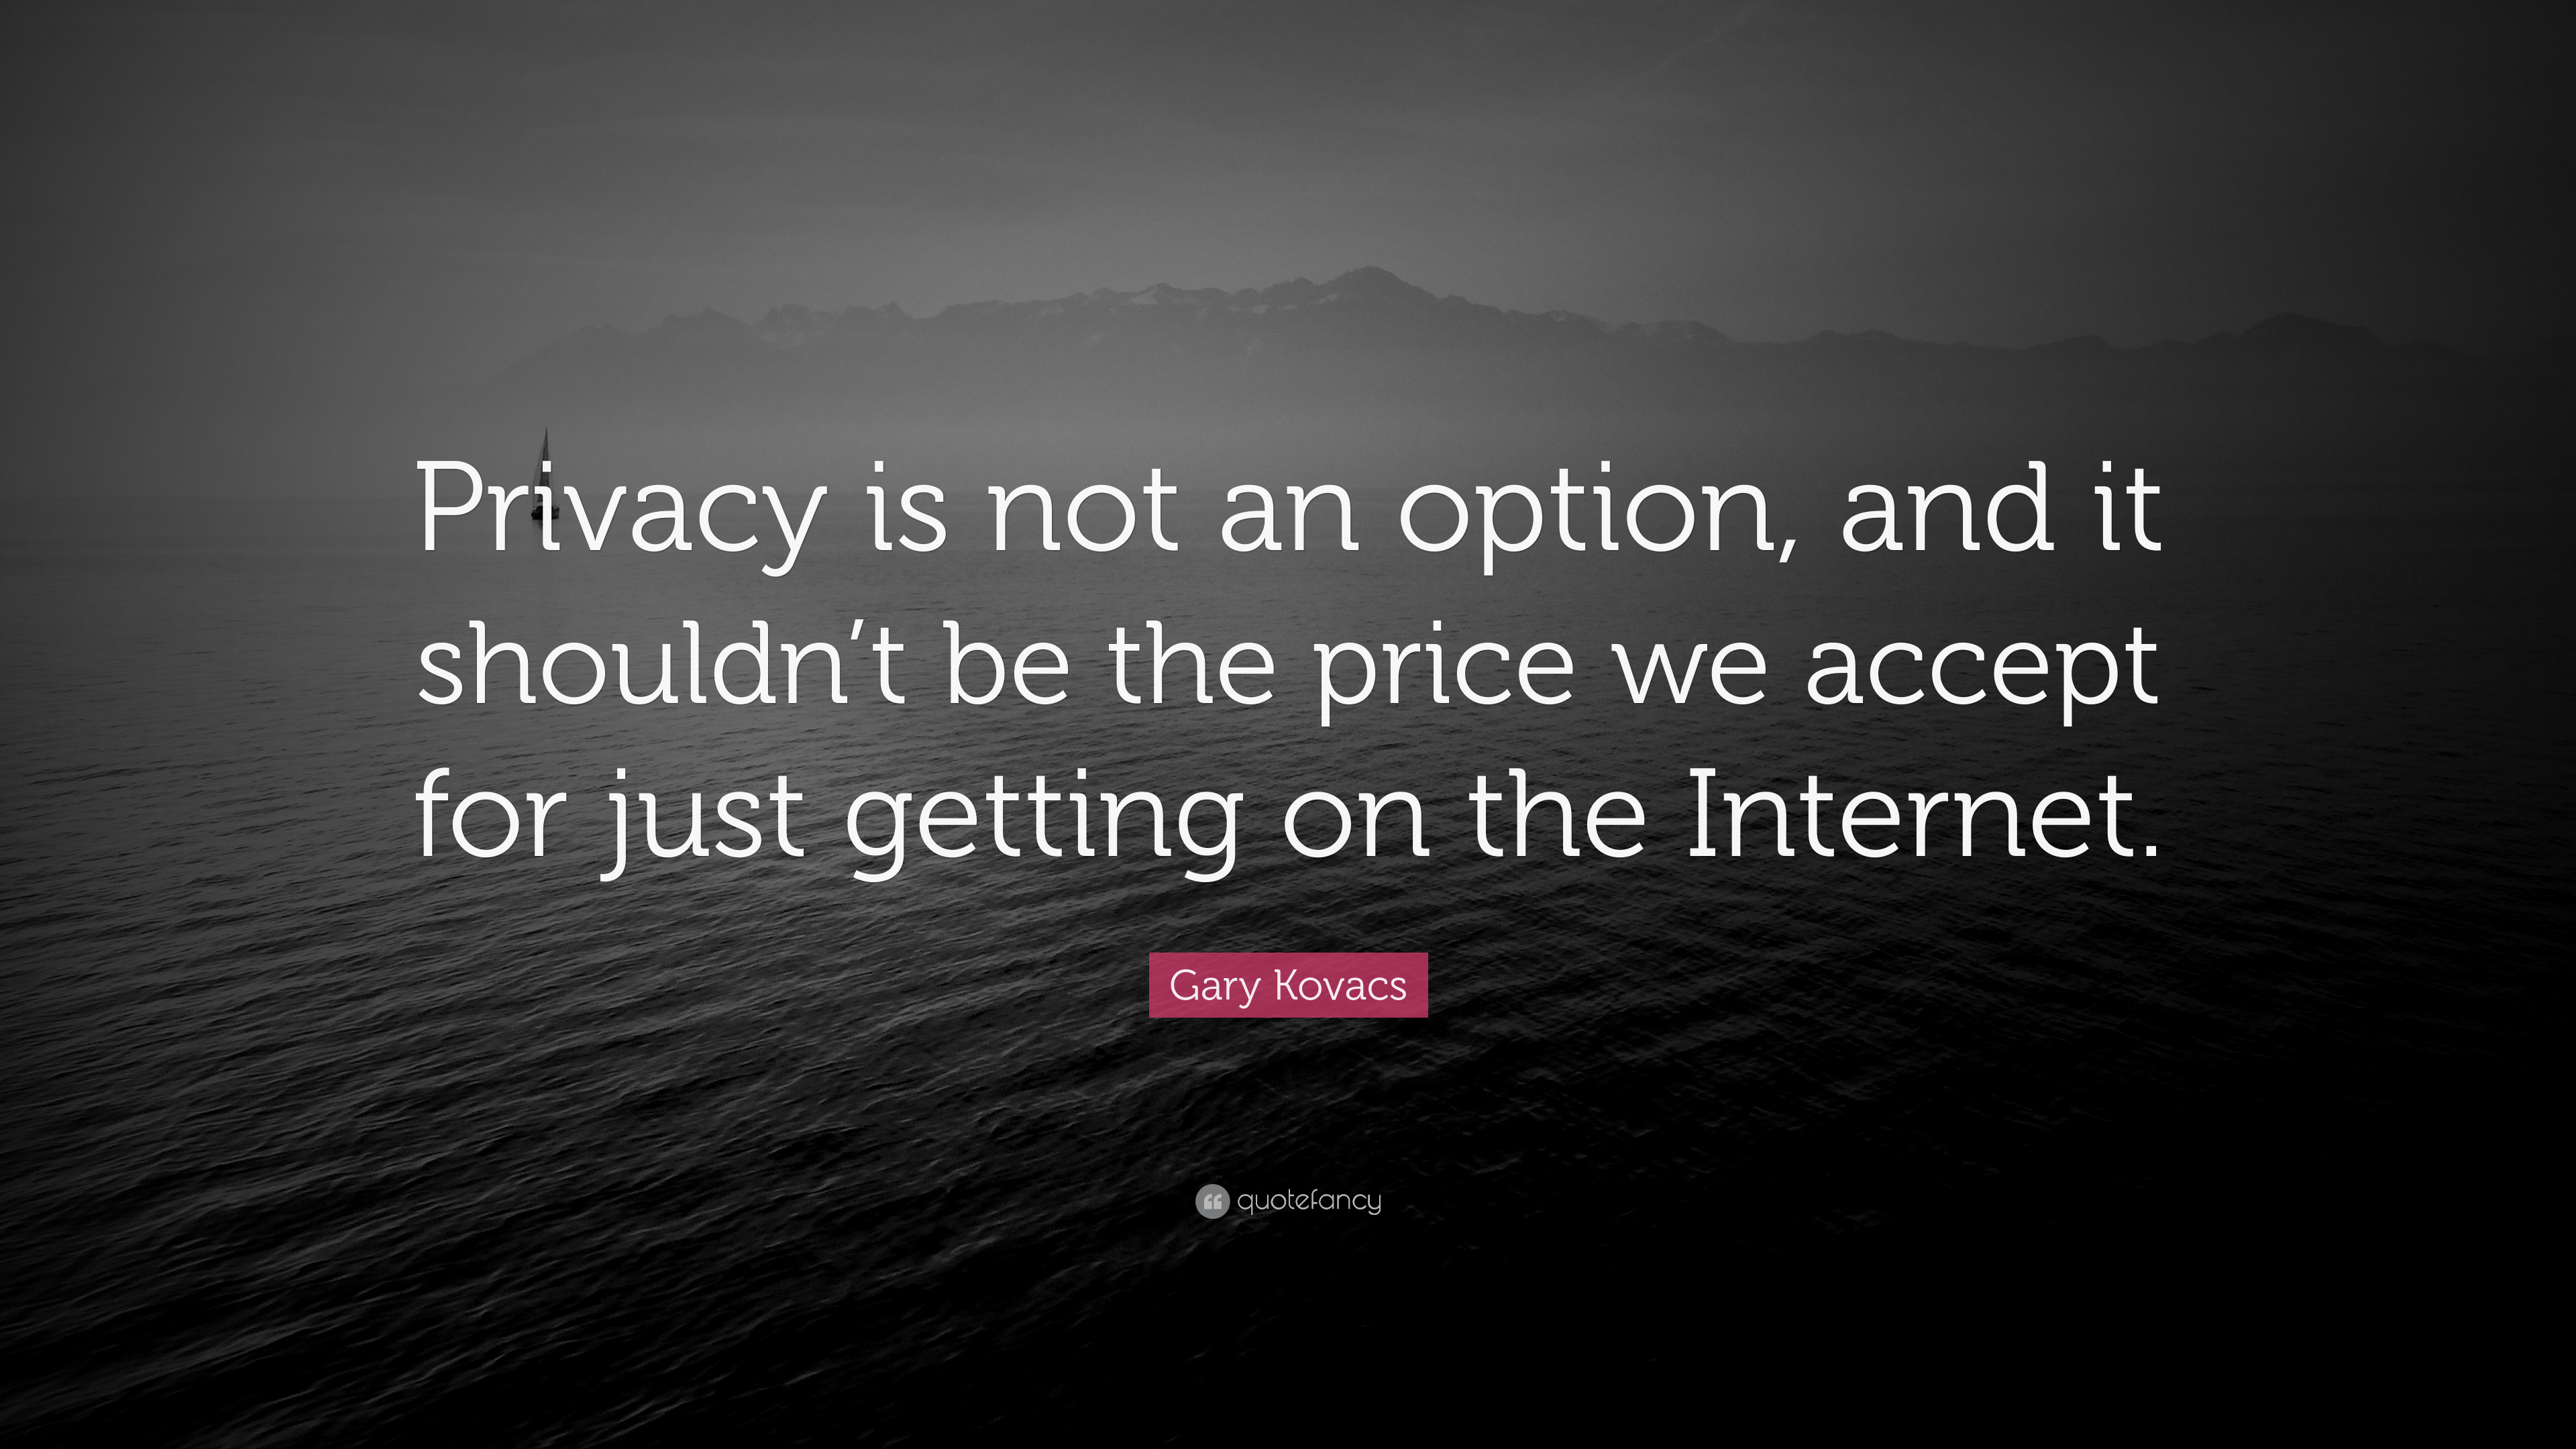 Gary Kovacs Quote: “Privacy is not an option, and it shouldn't be